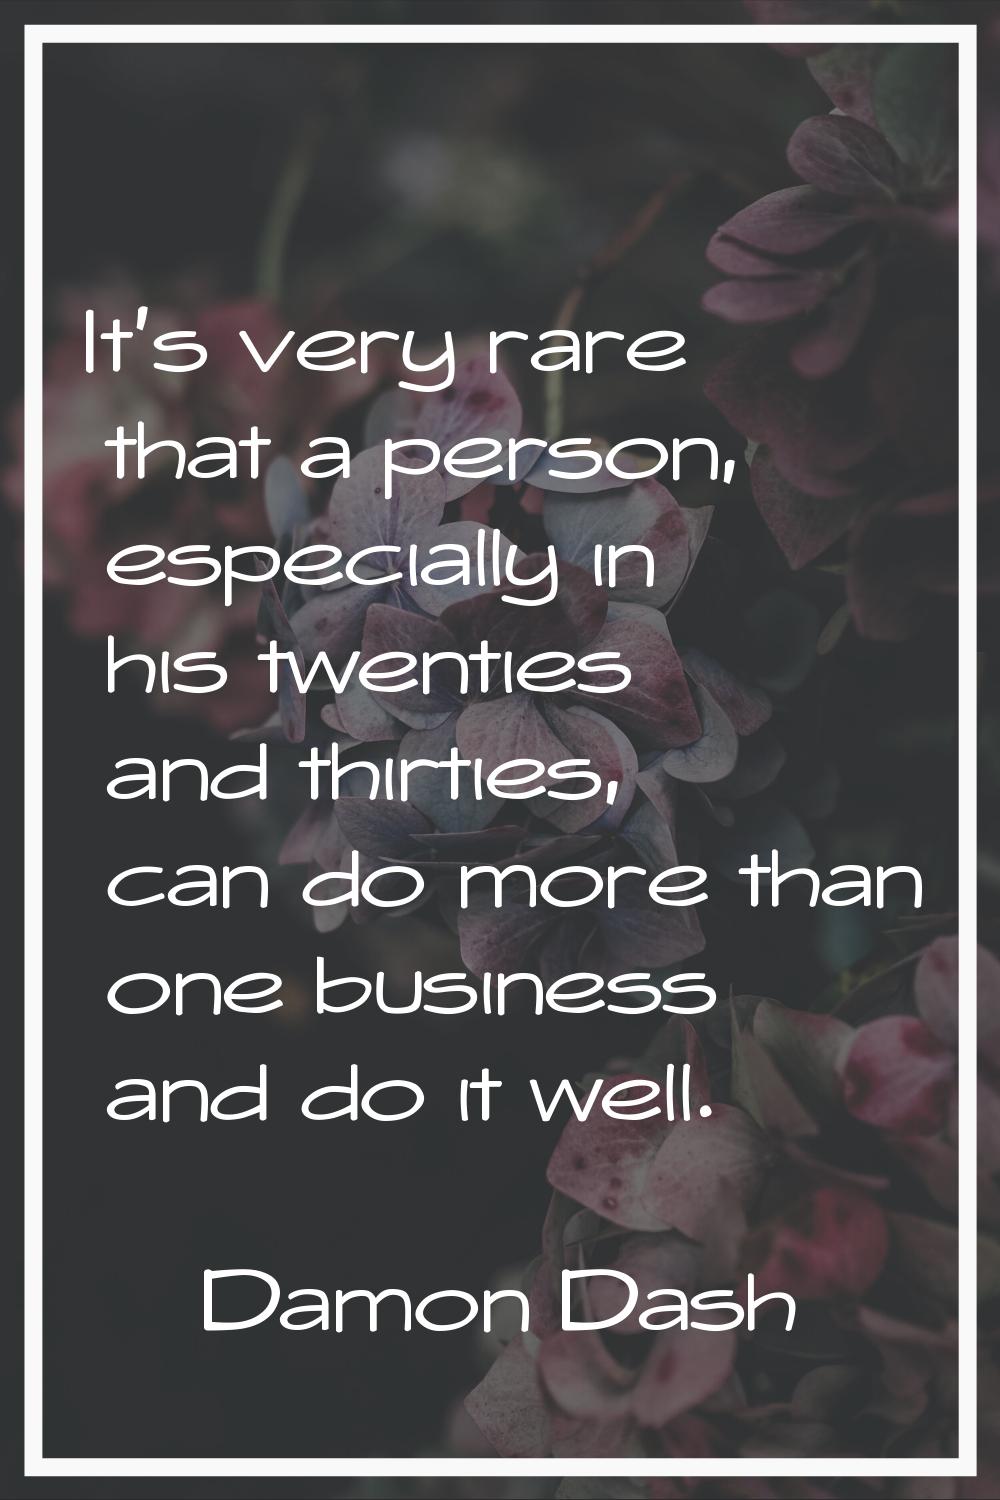 It's very rare that a person, especially in his twenties and thirties, can do more than one busines